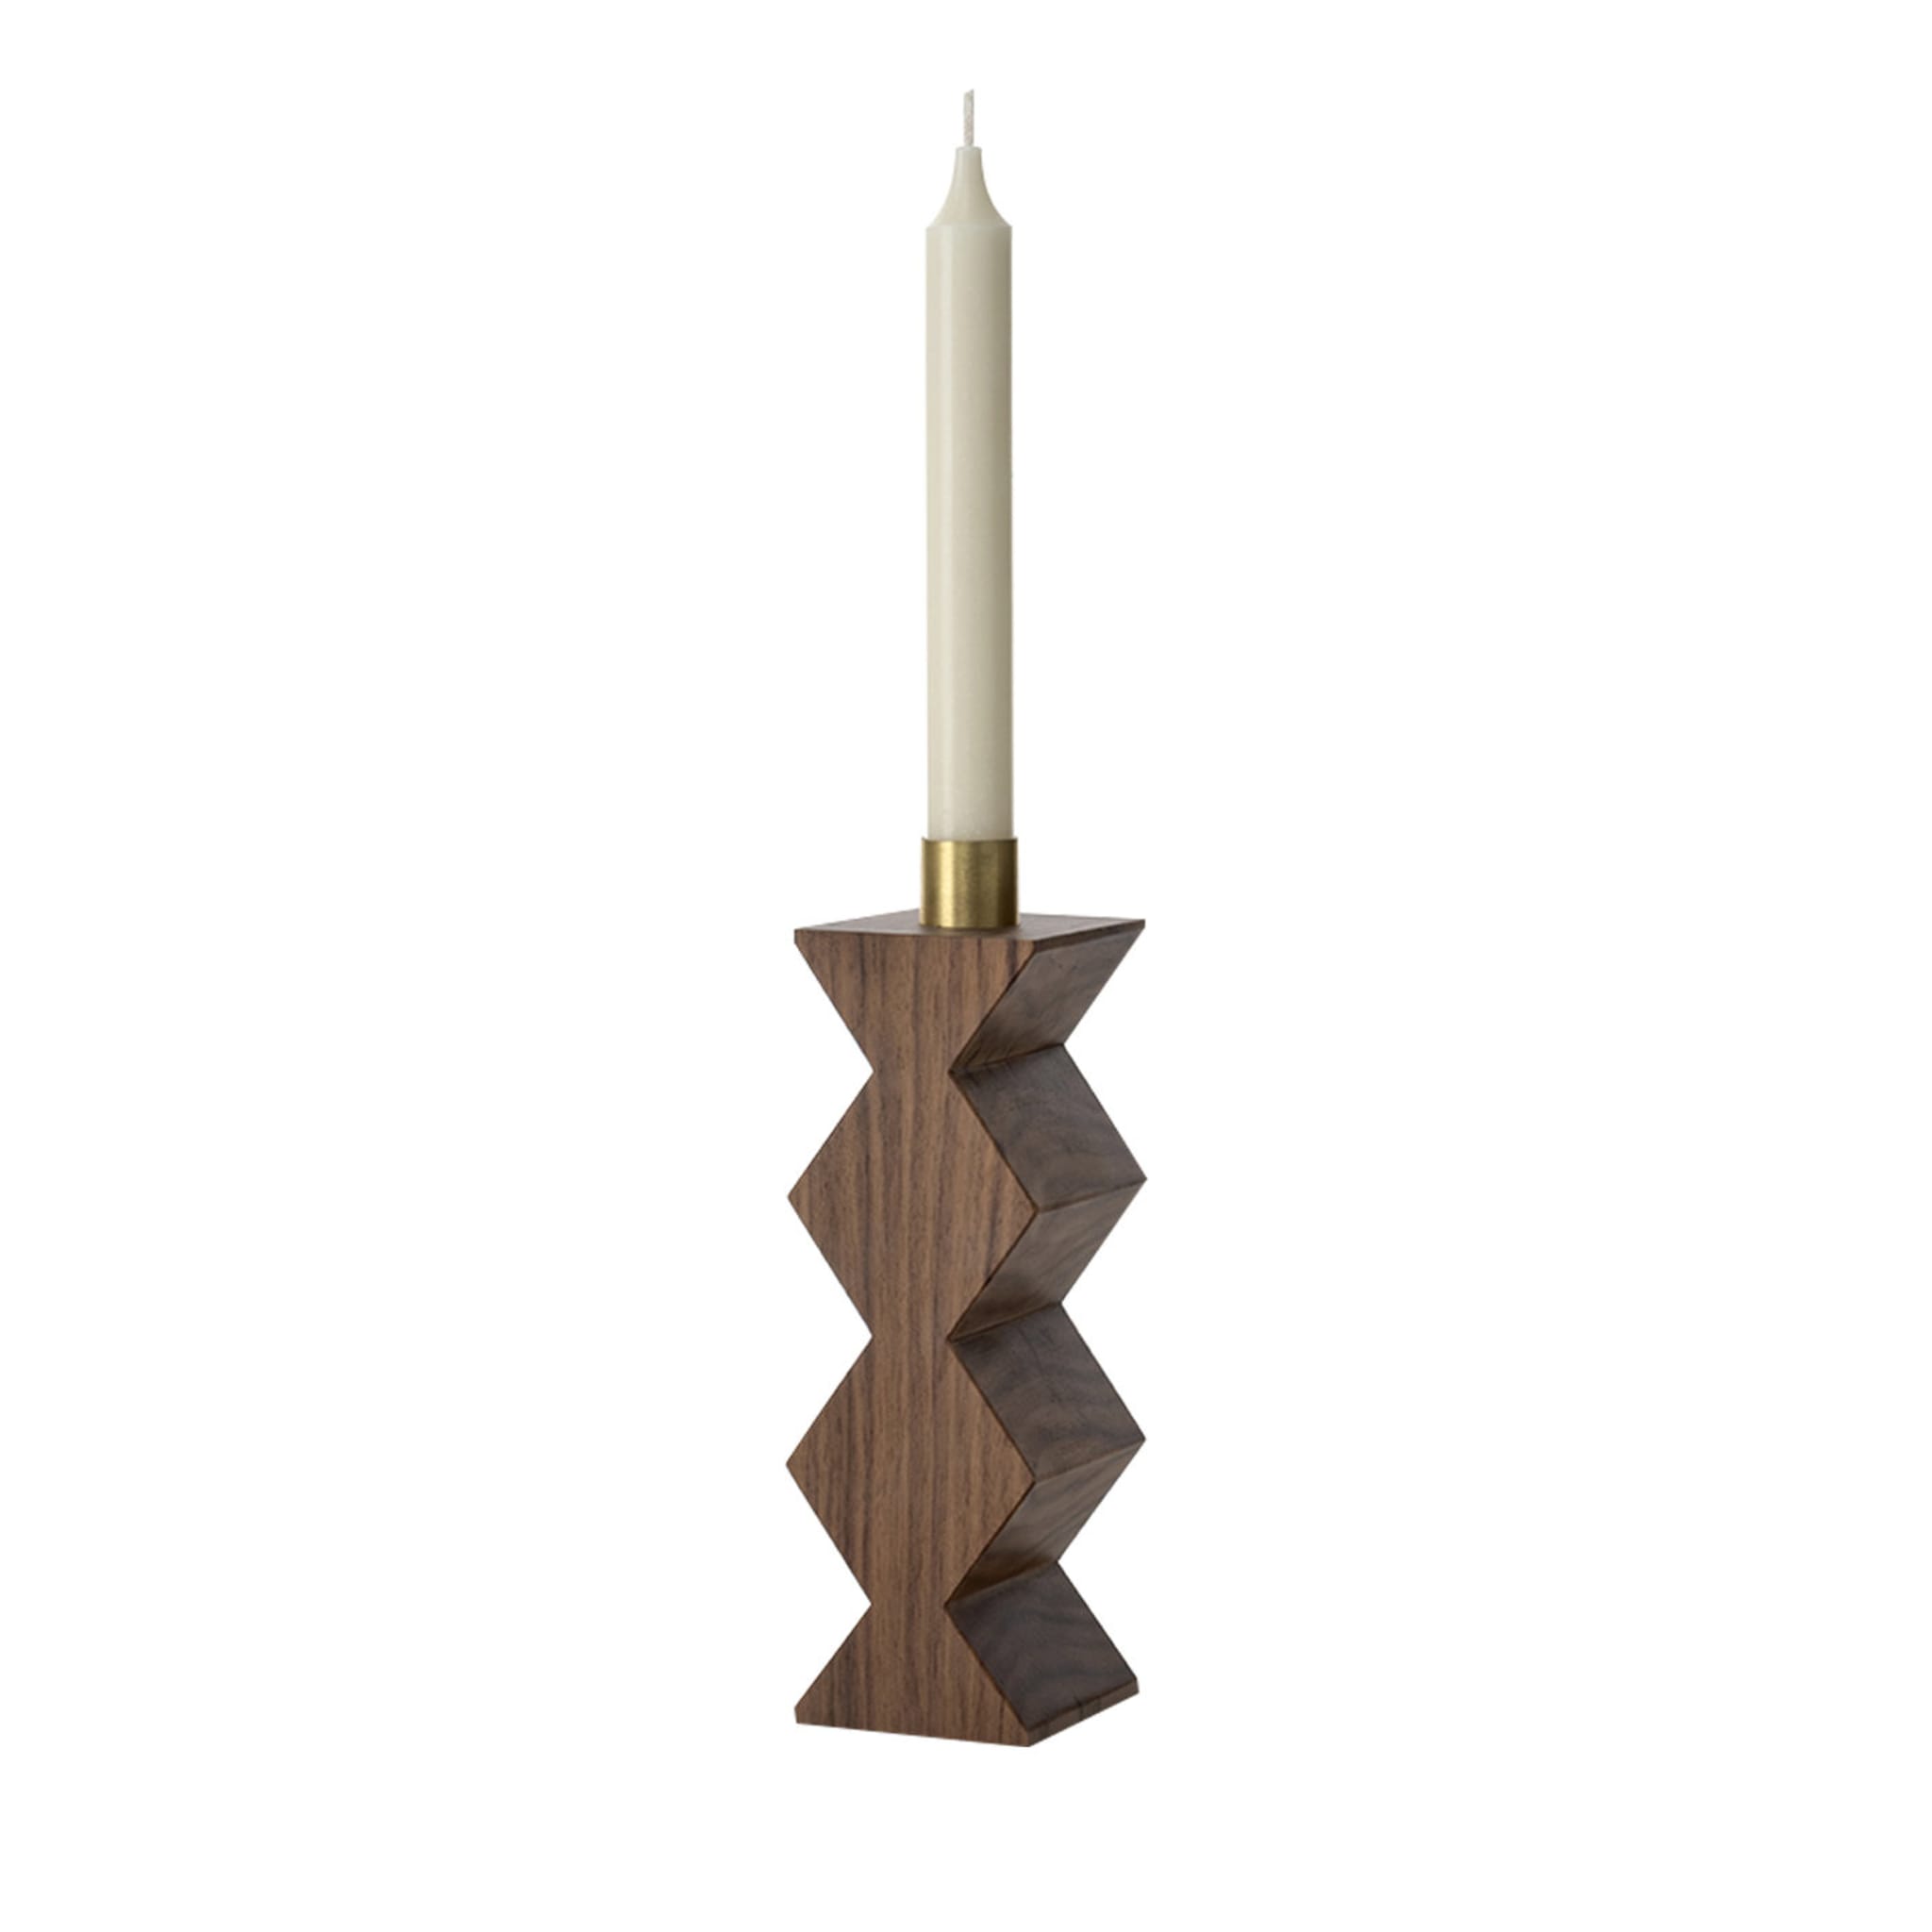 Constantin Walnut Candle Holder by Agustina Bottoni - Main view